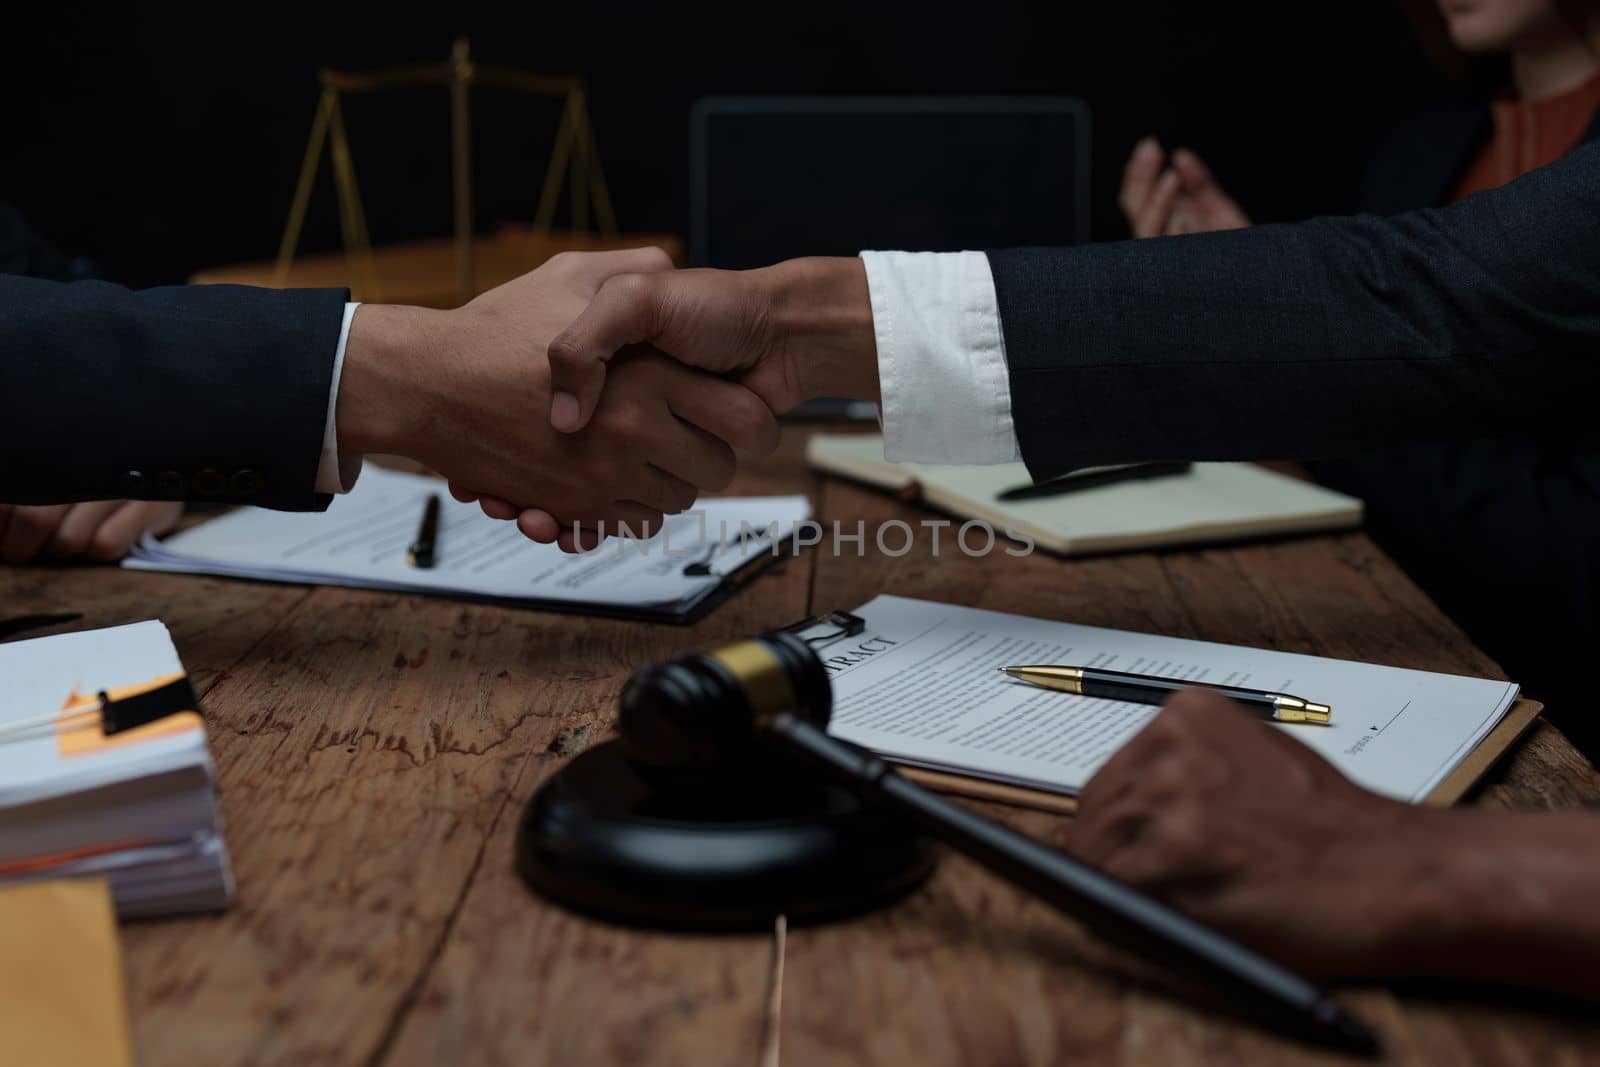 Businessman and Lawyer handshaking after good deal. Law, legal services, advice, Justice concept.